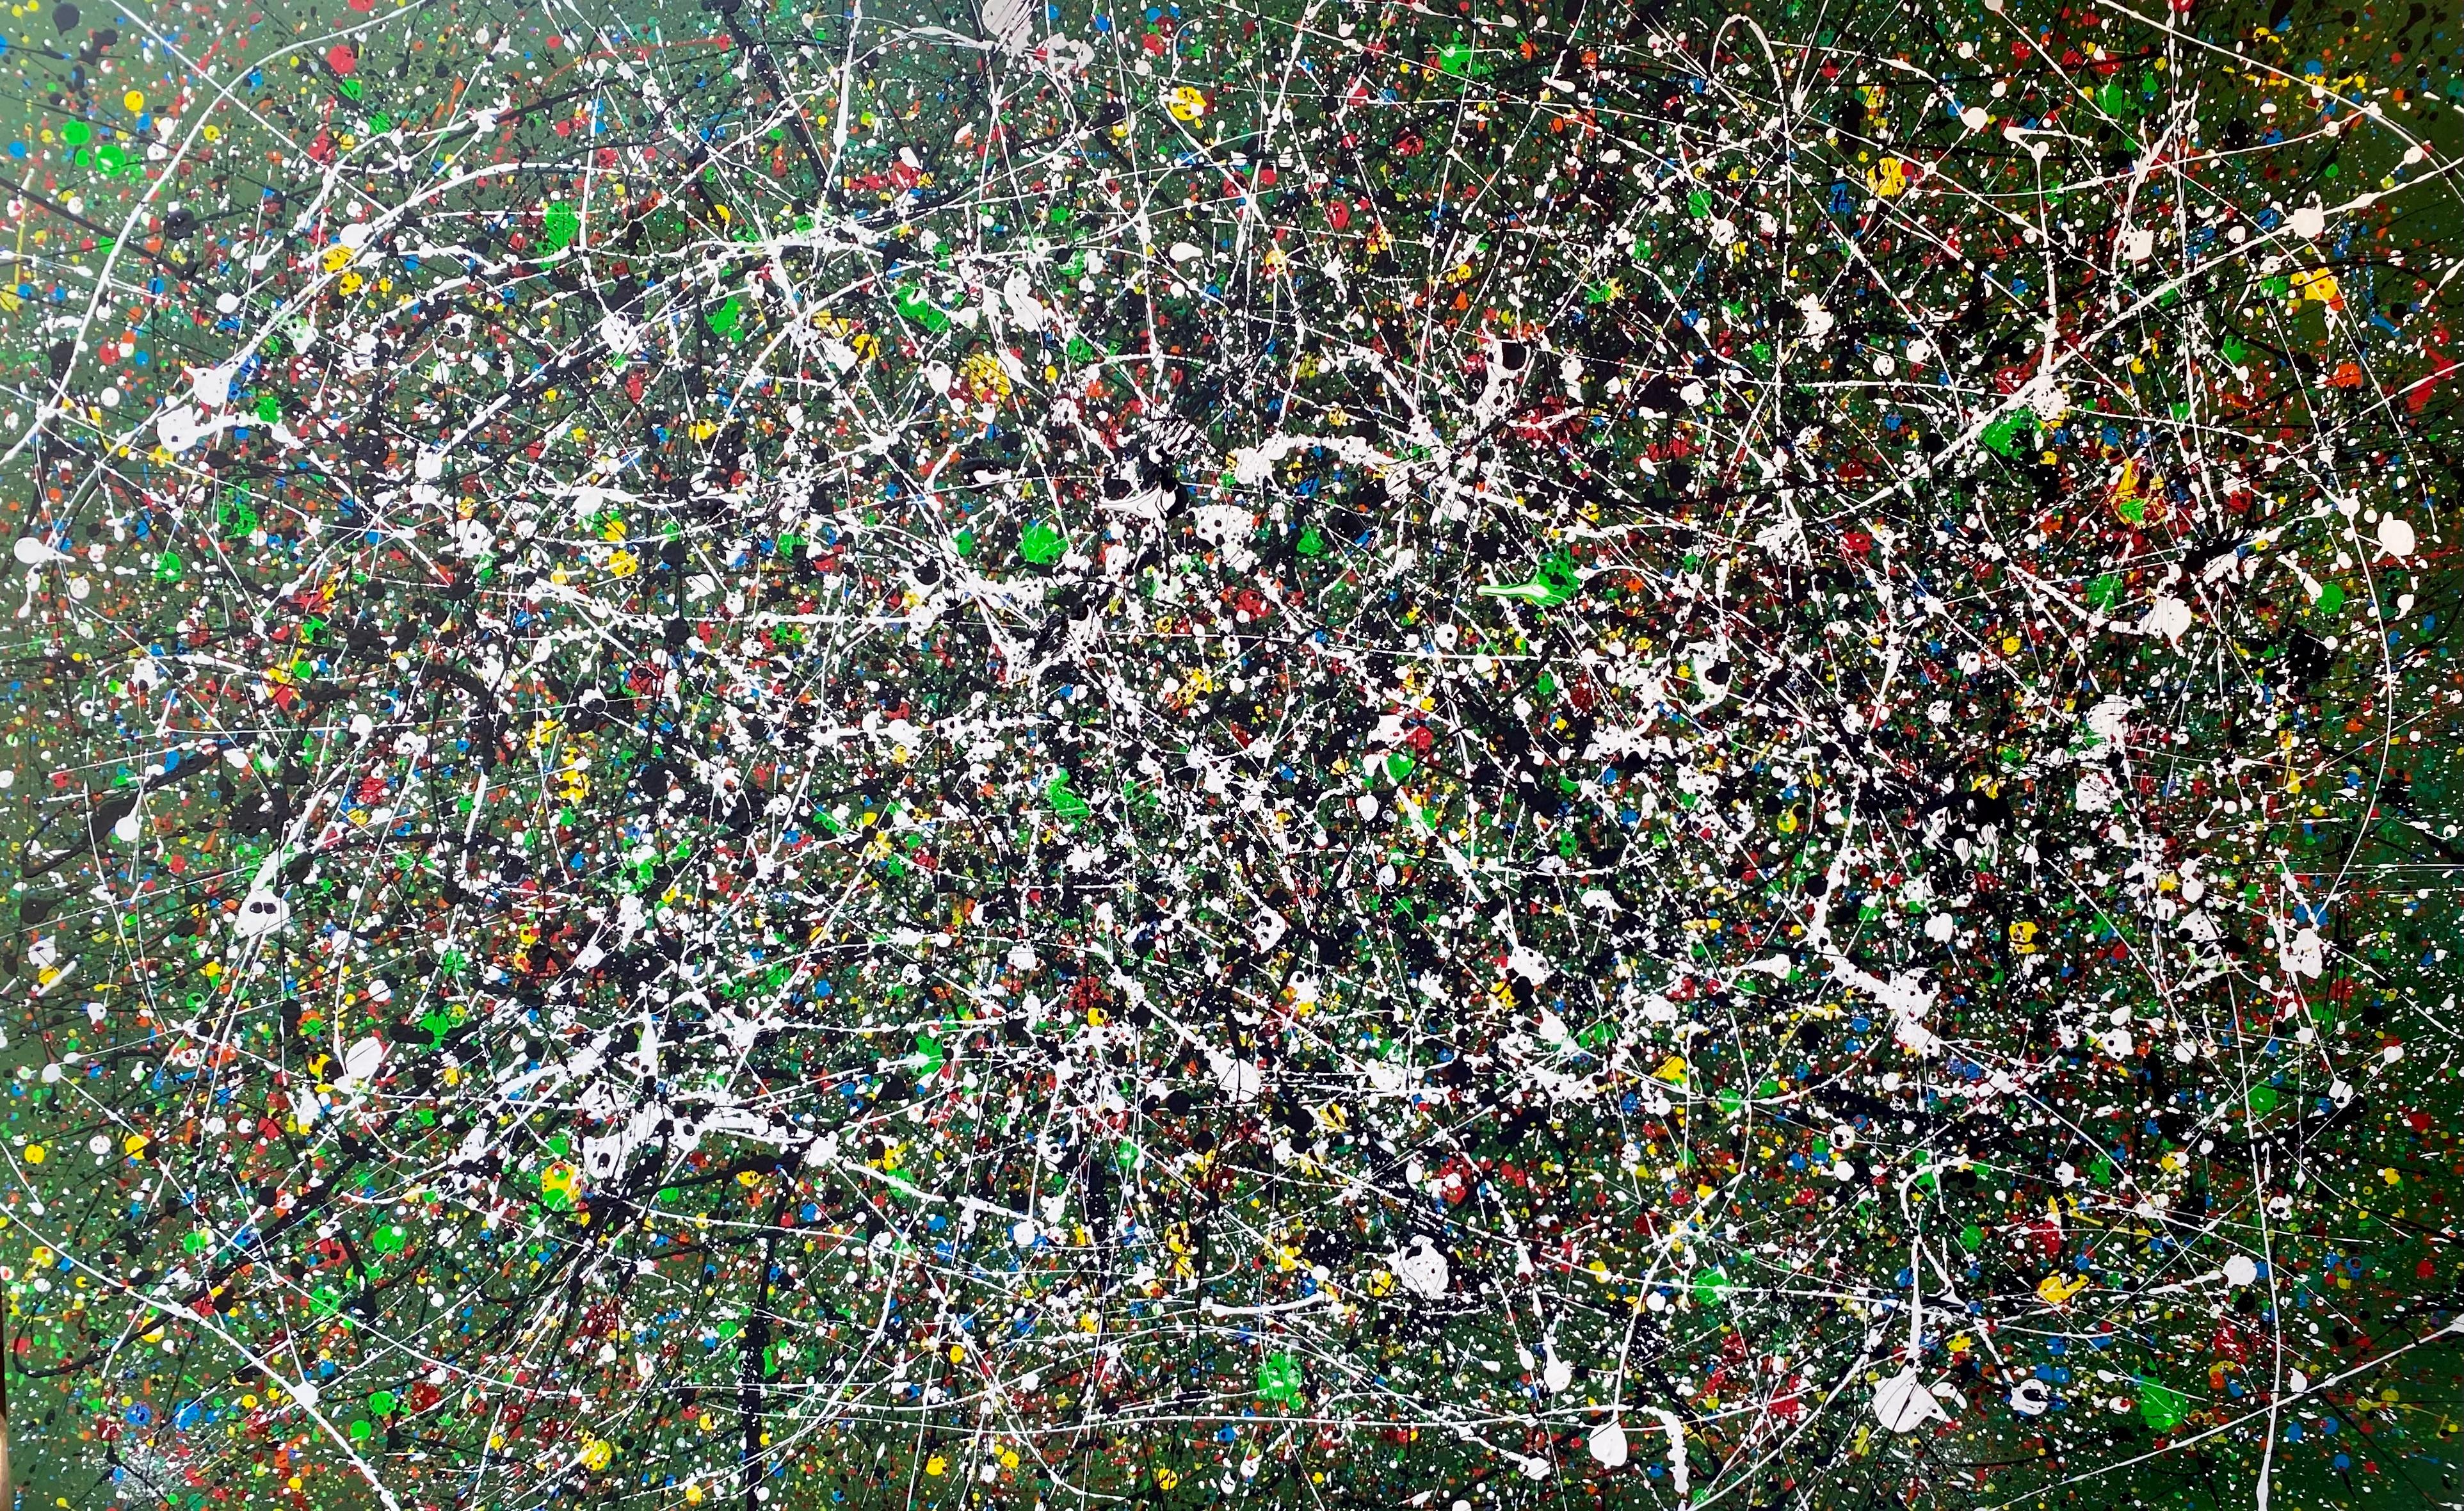 Nataliia Krykun Abstract Painting - Series "Infinite Flight" green, black, white, yellow large abstraction, drops